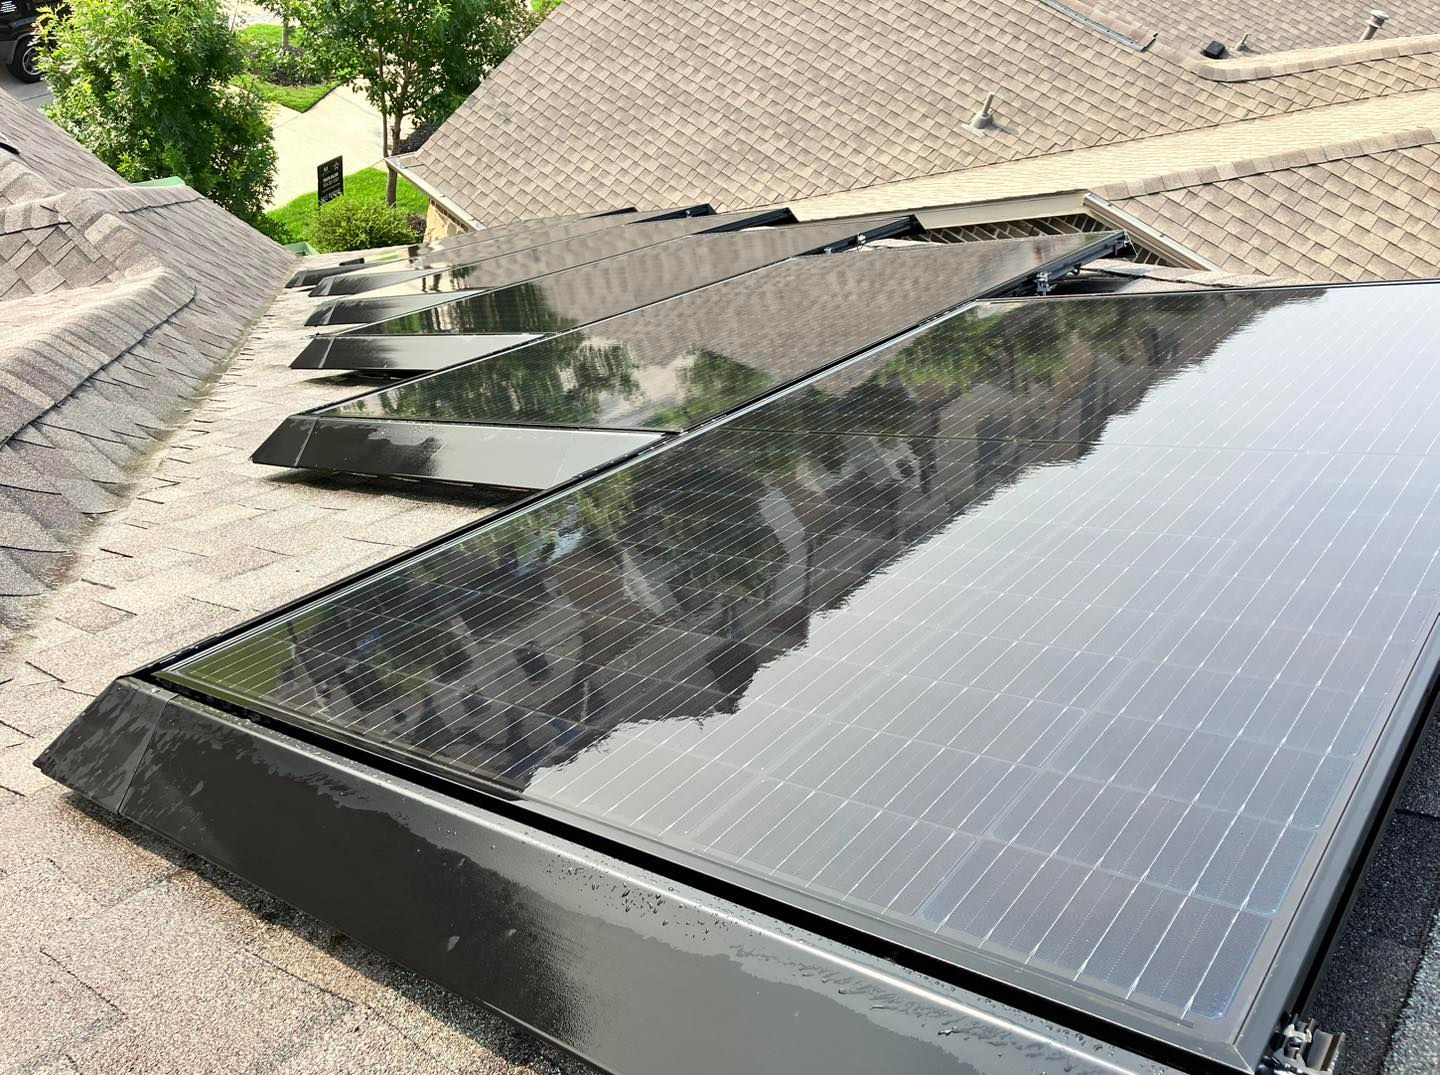 Anaheim residential solar panels shine brilliantly following our meticulous professional cleaning.